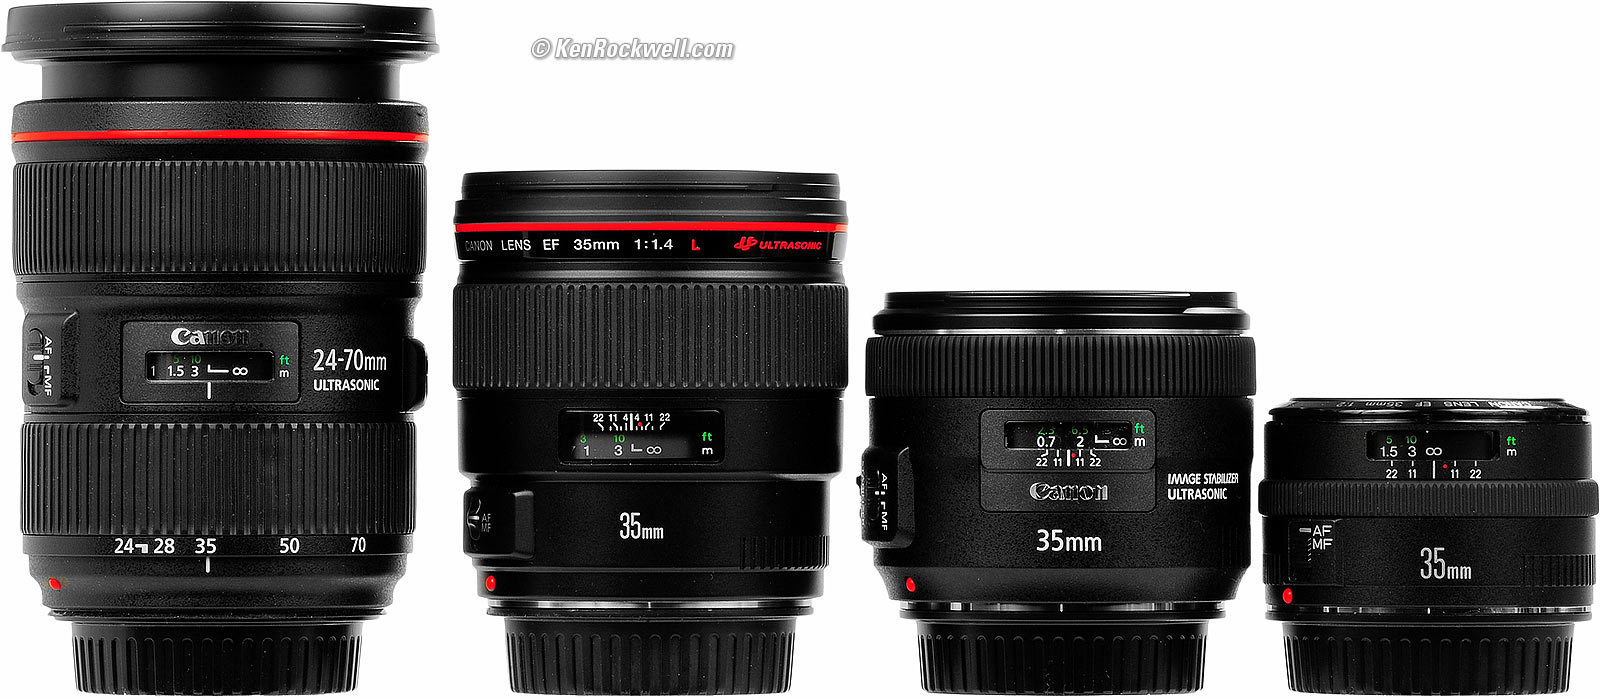 Canon 35mm f/2 Review